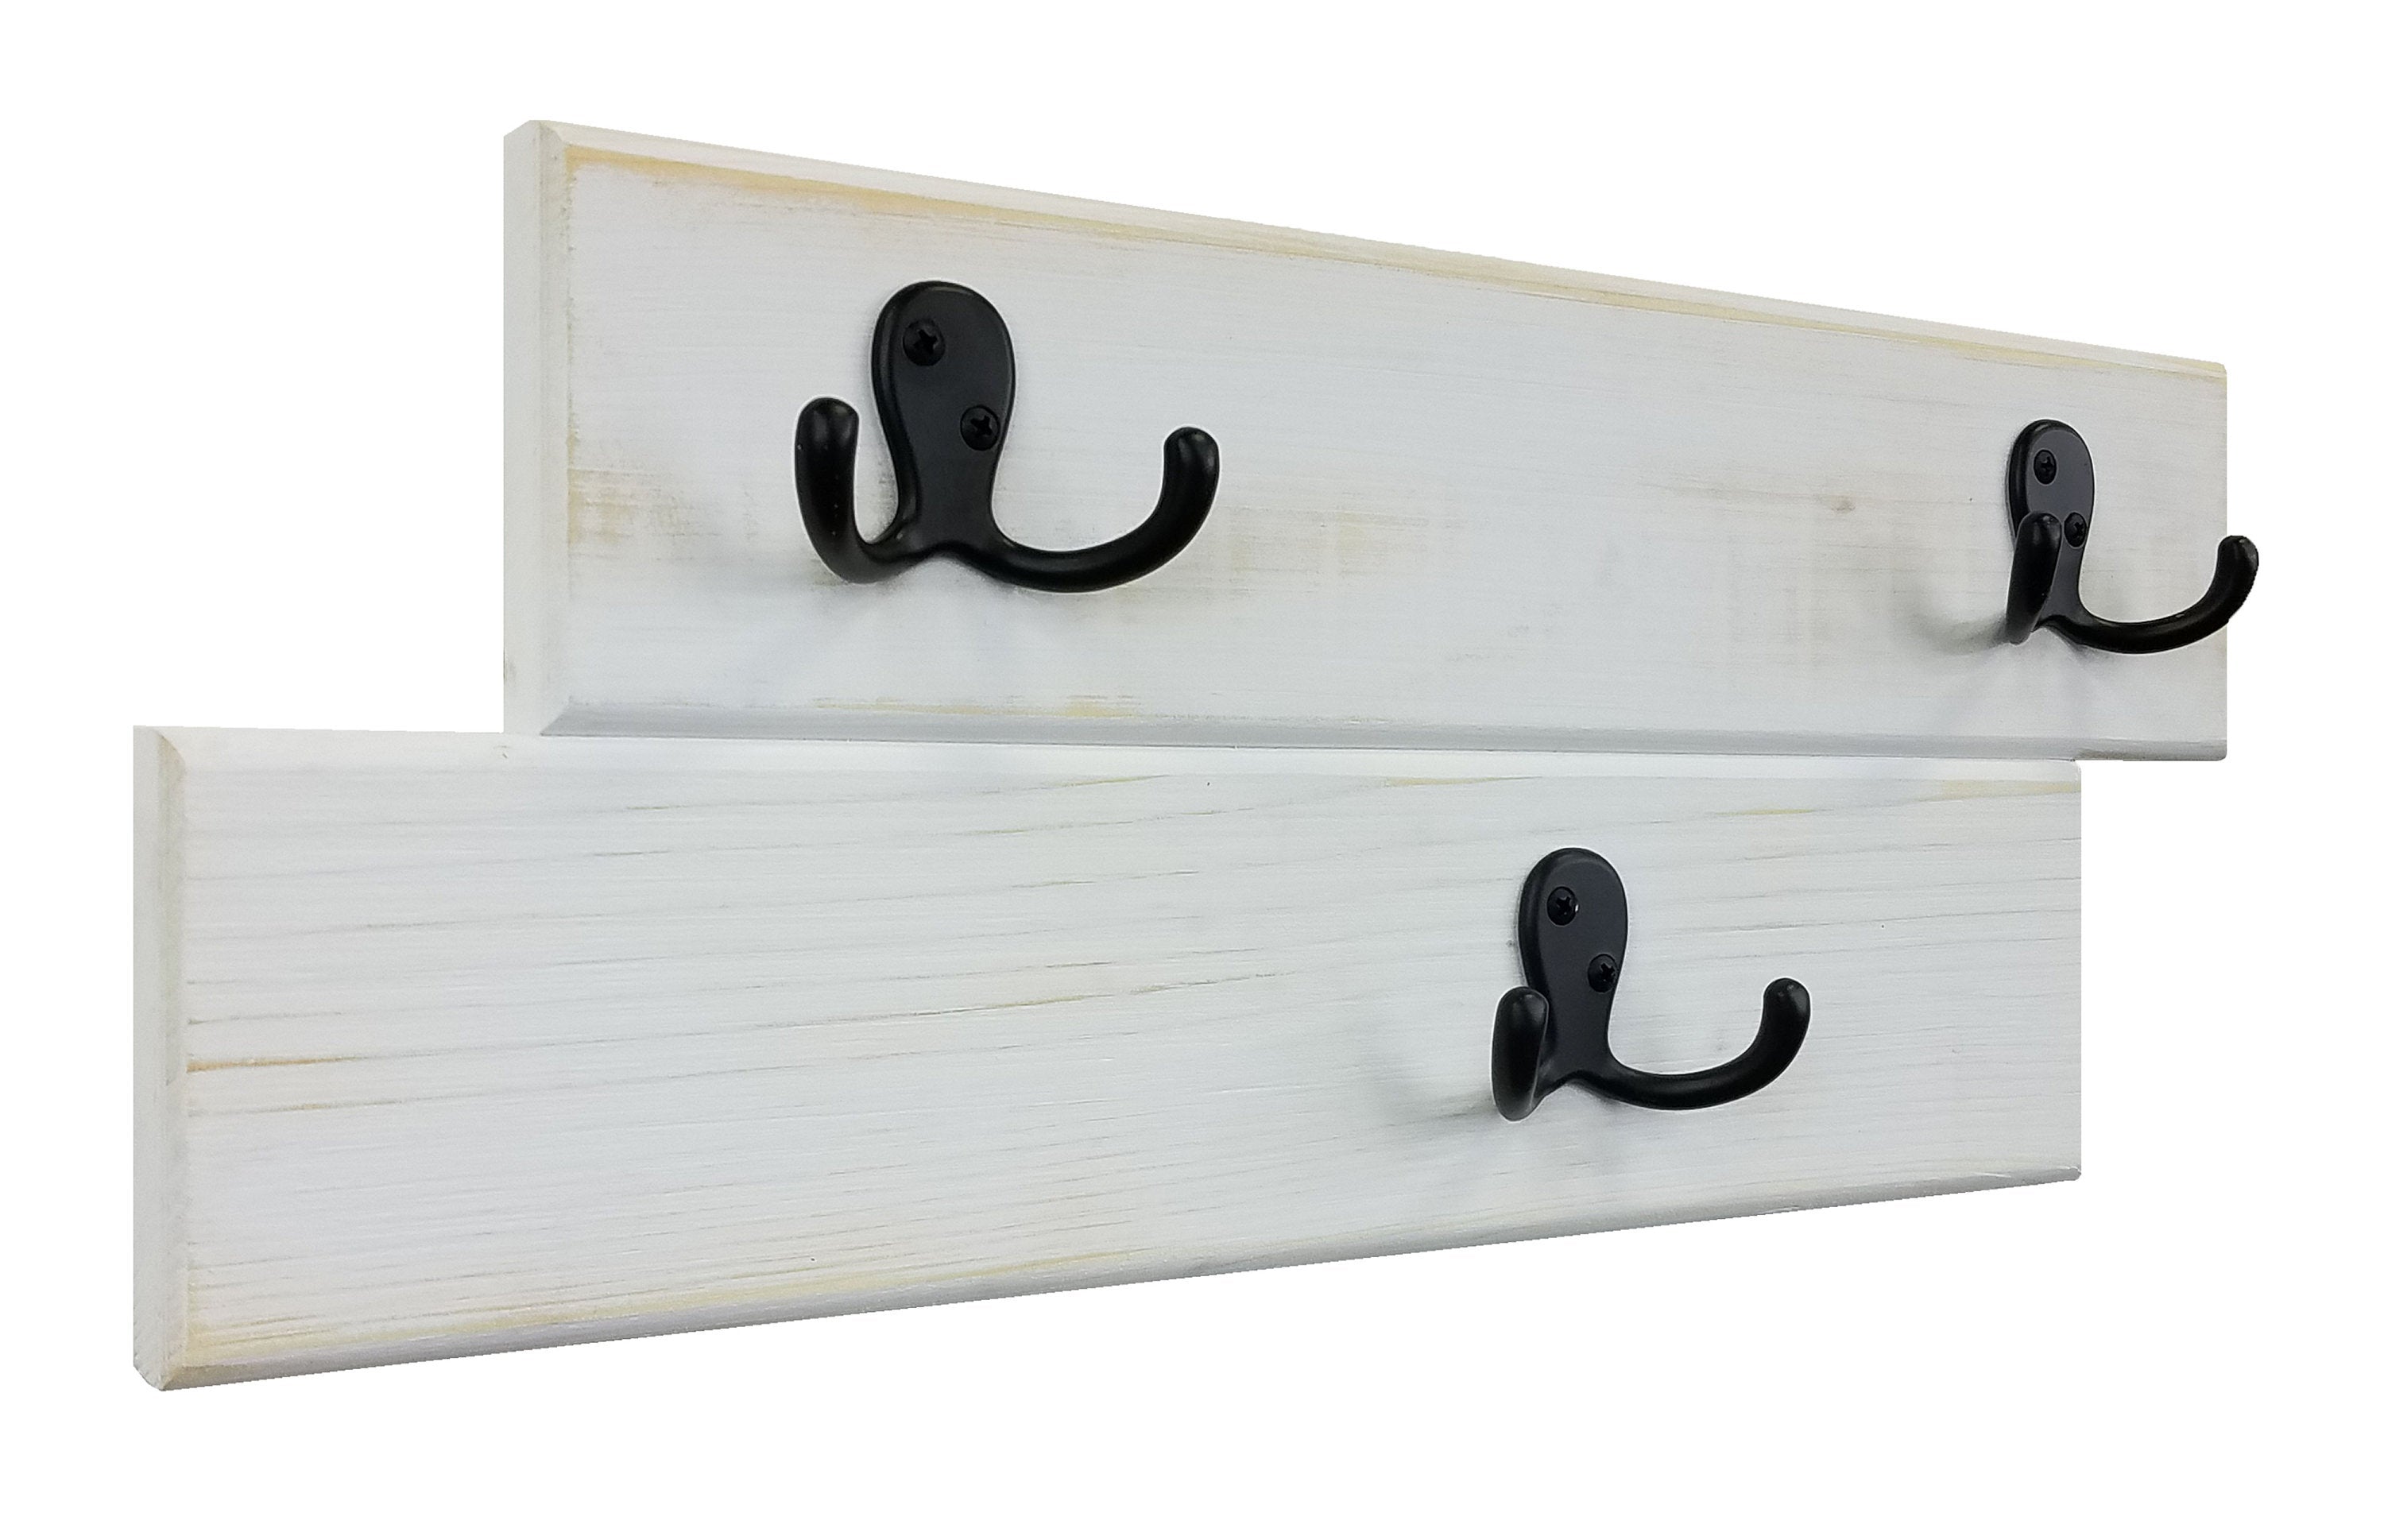 Arbor Way Wall Hooks - 20 Paint Colors, Shown in Bright Ivory White
